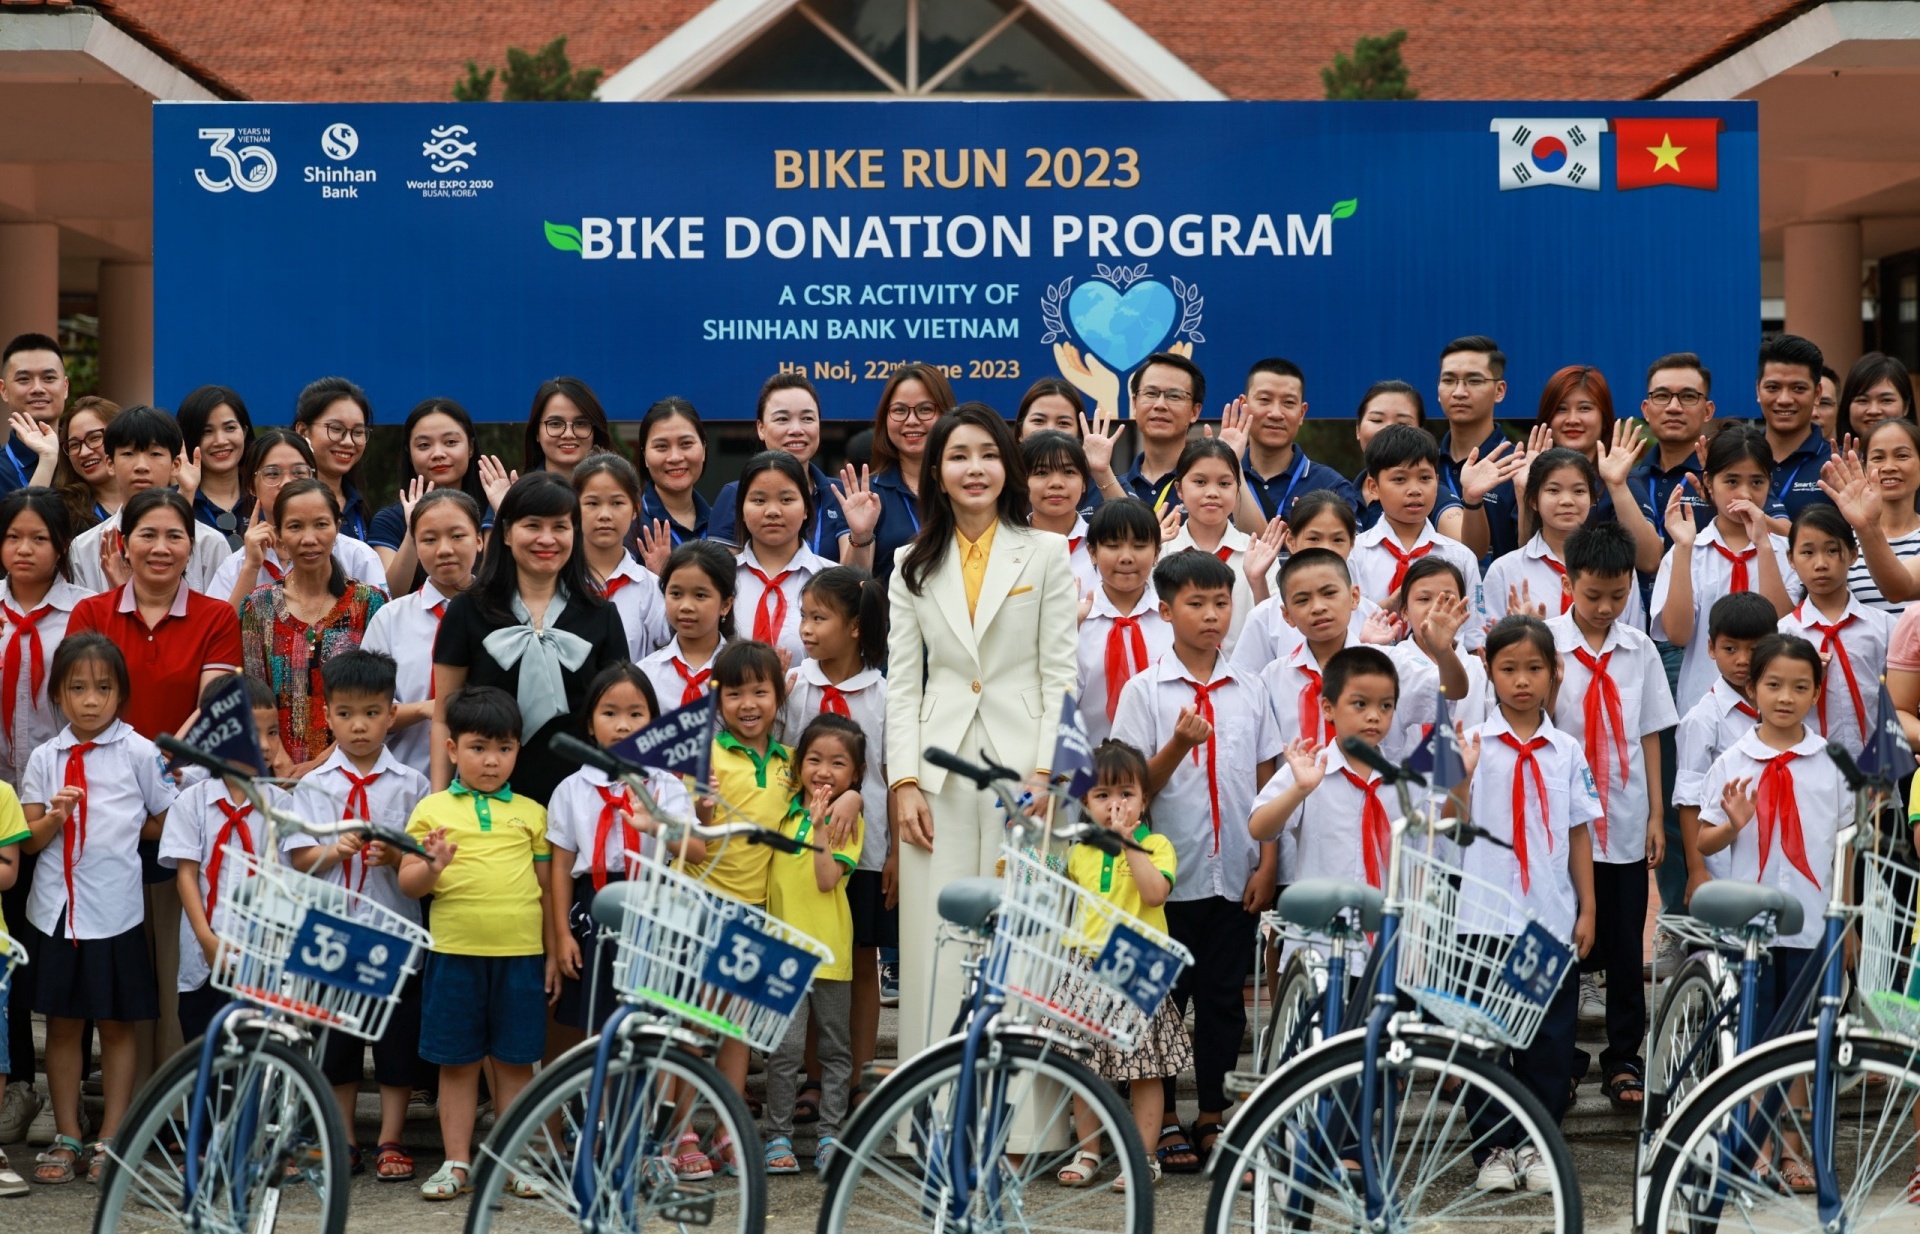 Shinhan Bank Vietnam organised “Bike Run” event to present bicycles and scholarships to students at SOS Children’s Village Vietnam, attended by the First Lady of the Republic Korea